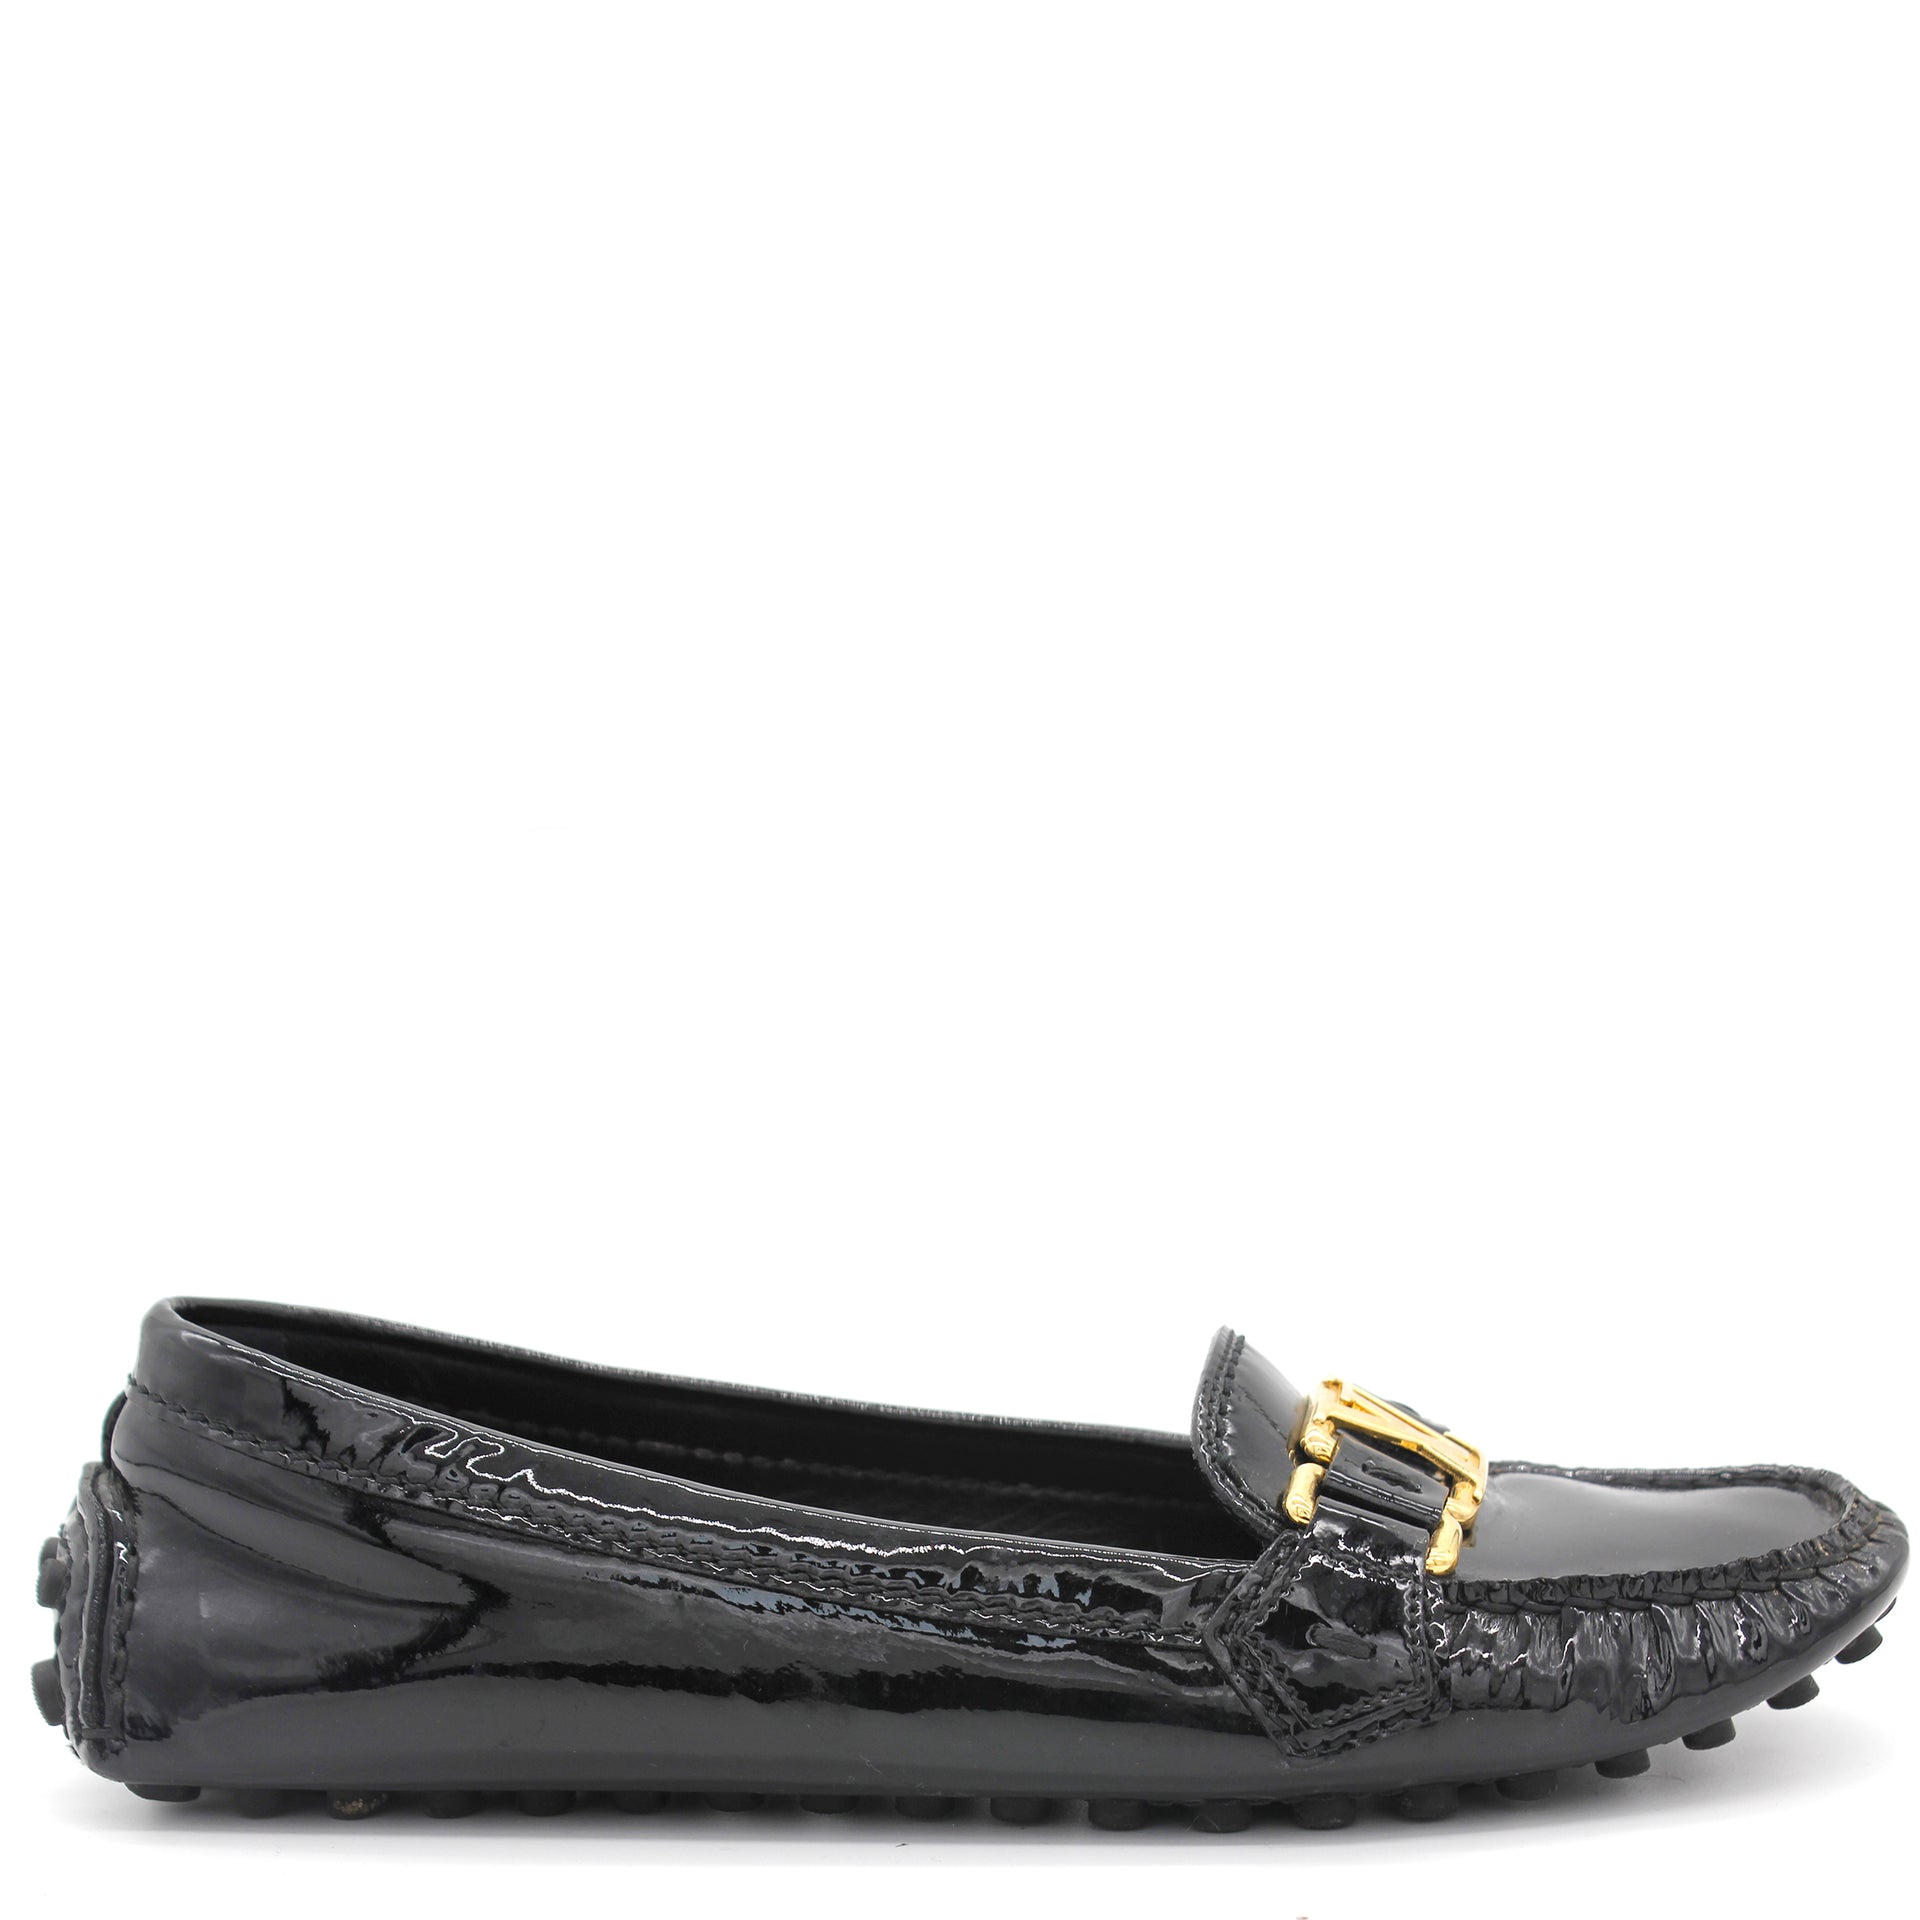 RARE Louis Vuitton EXOTIC LEATHER Moccasin Loafer Black size 9 US